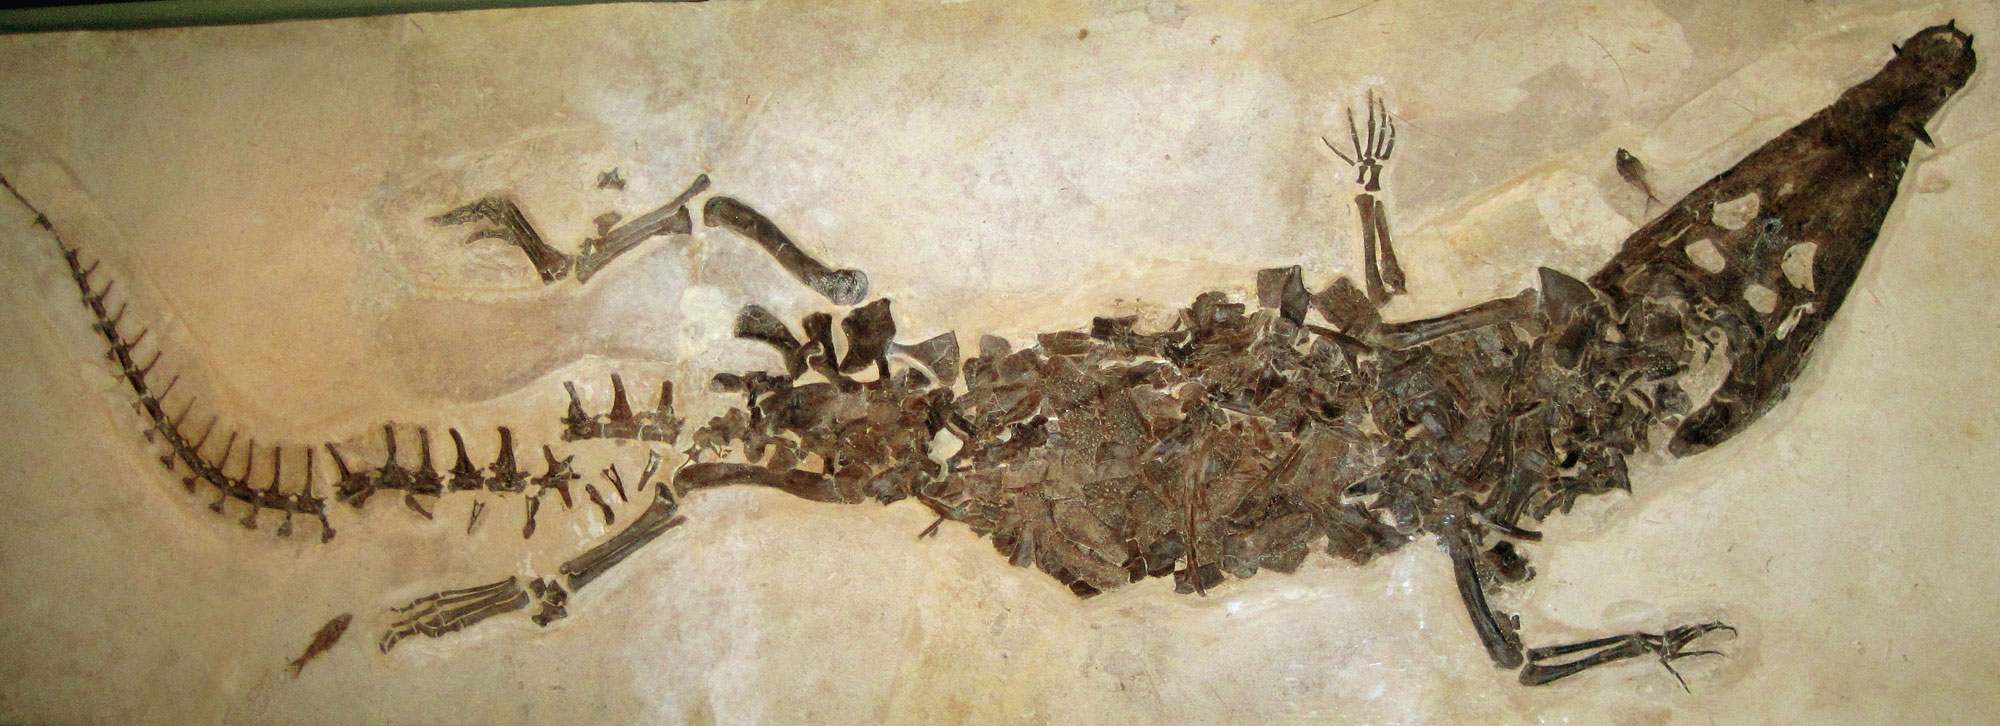 Photograph of a fossil crocodile from Fossil Lake, Wyoming. The photo shows a nearly complete crocodile specimen with its head to the right and its tail to the left. The skeleton is preserved on a beige slab of rock.